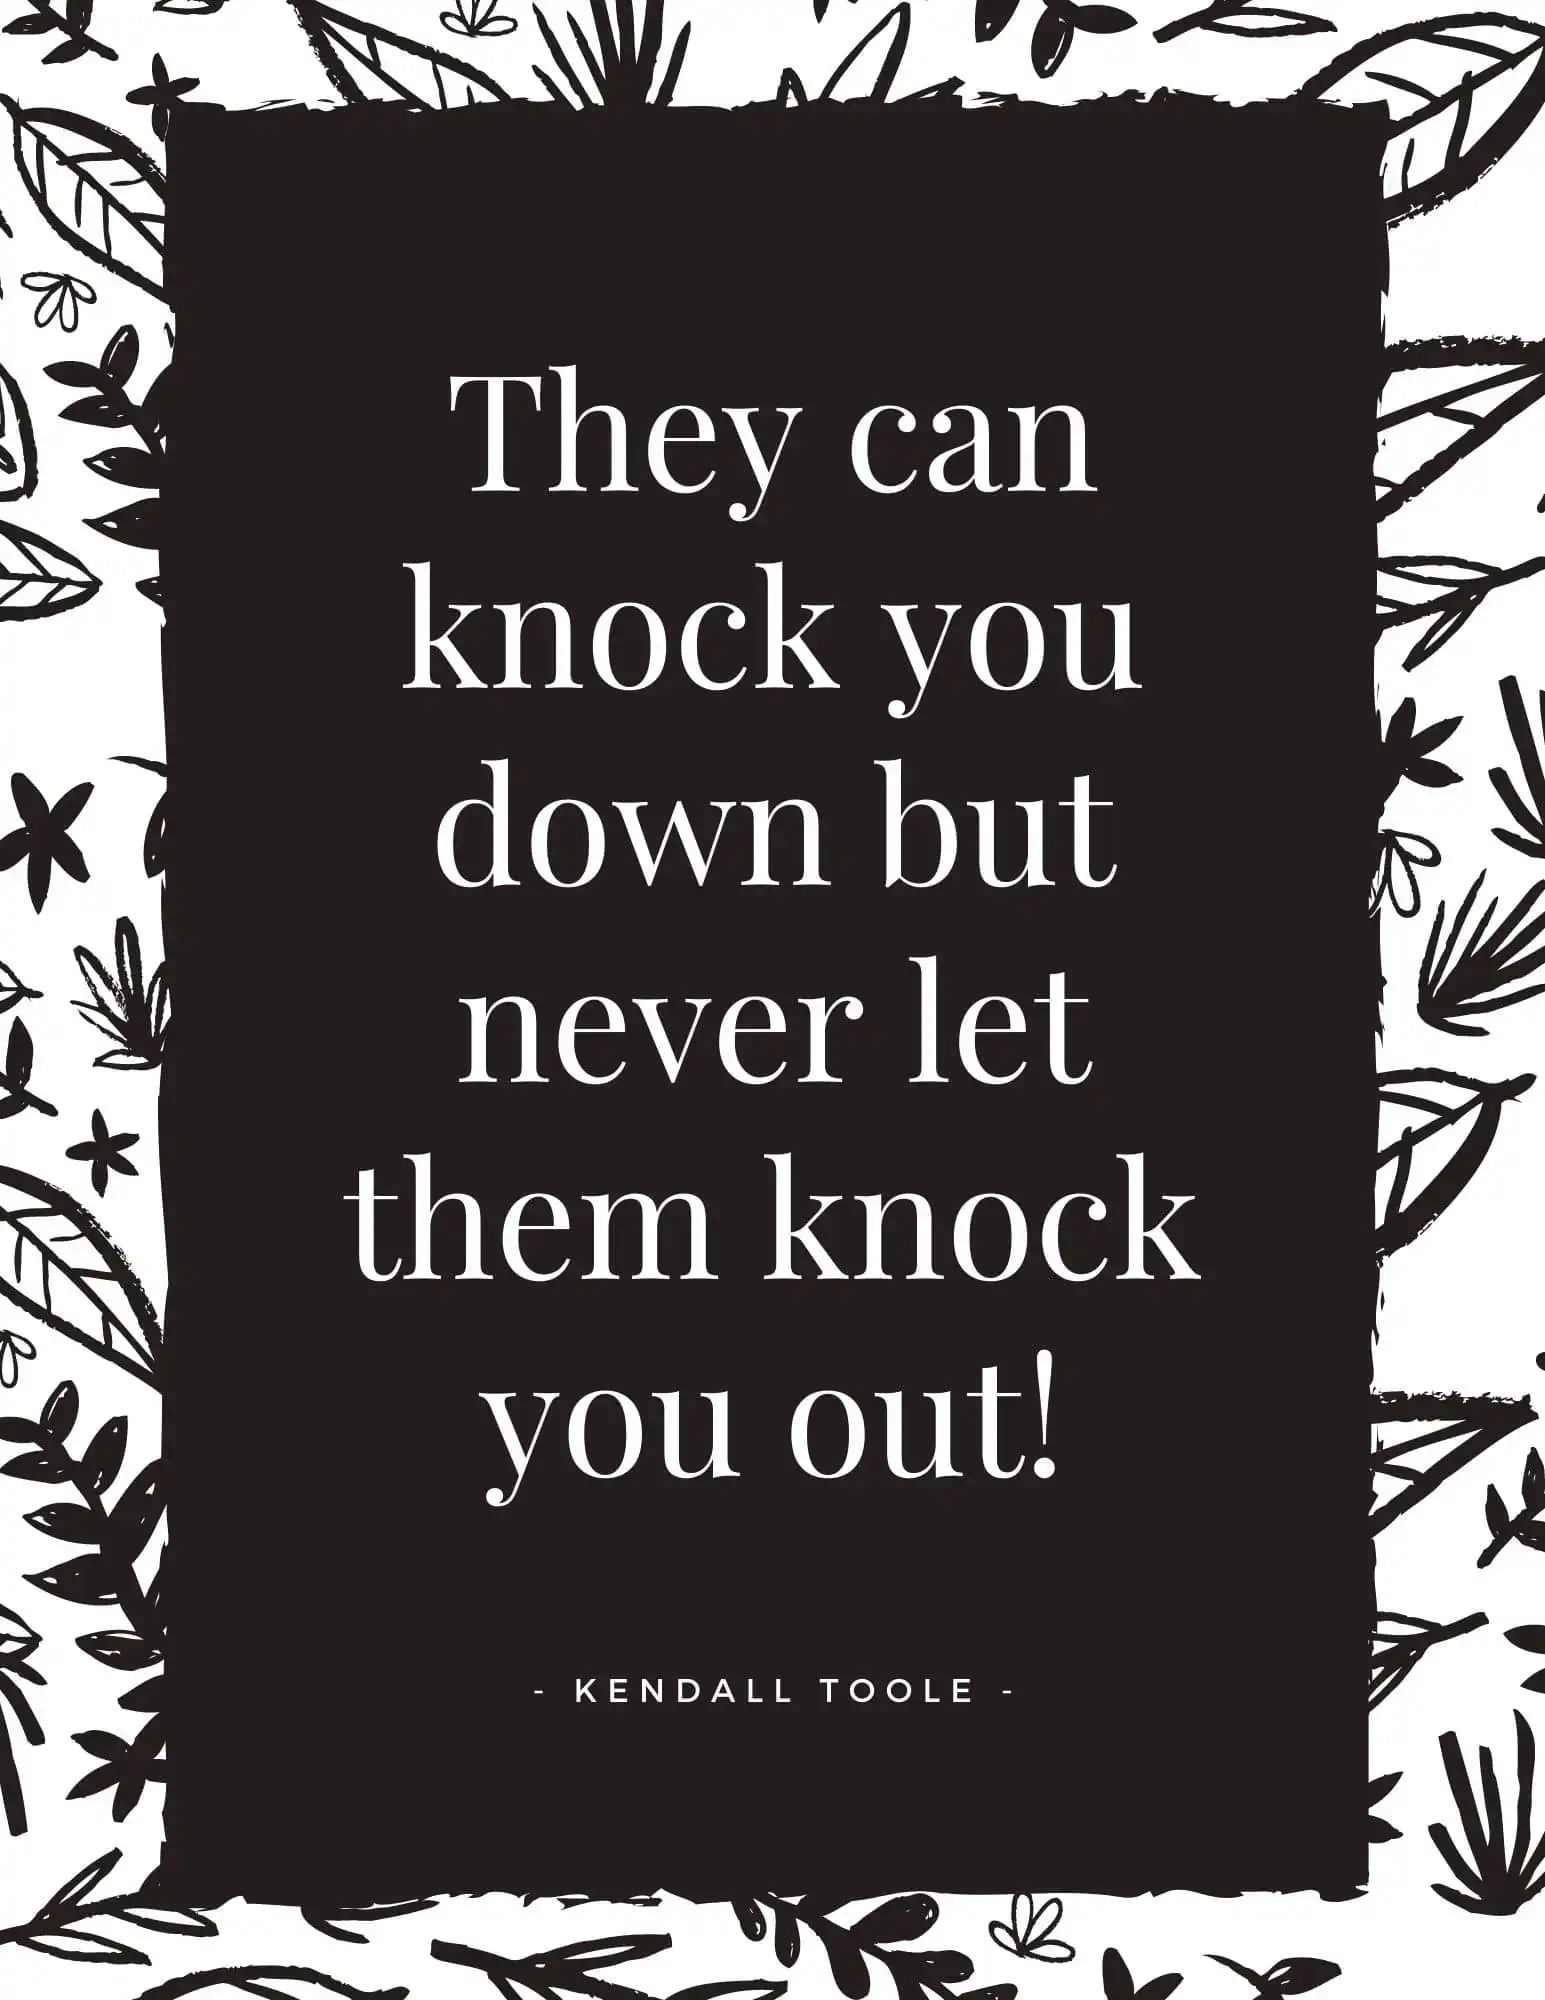 Kendall Toole Knockout Instructor Quotes Digital Motivation Print